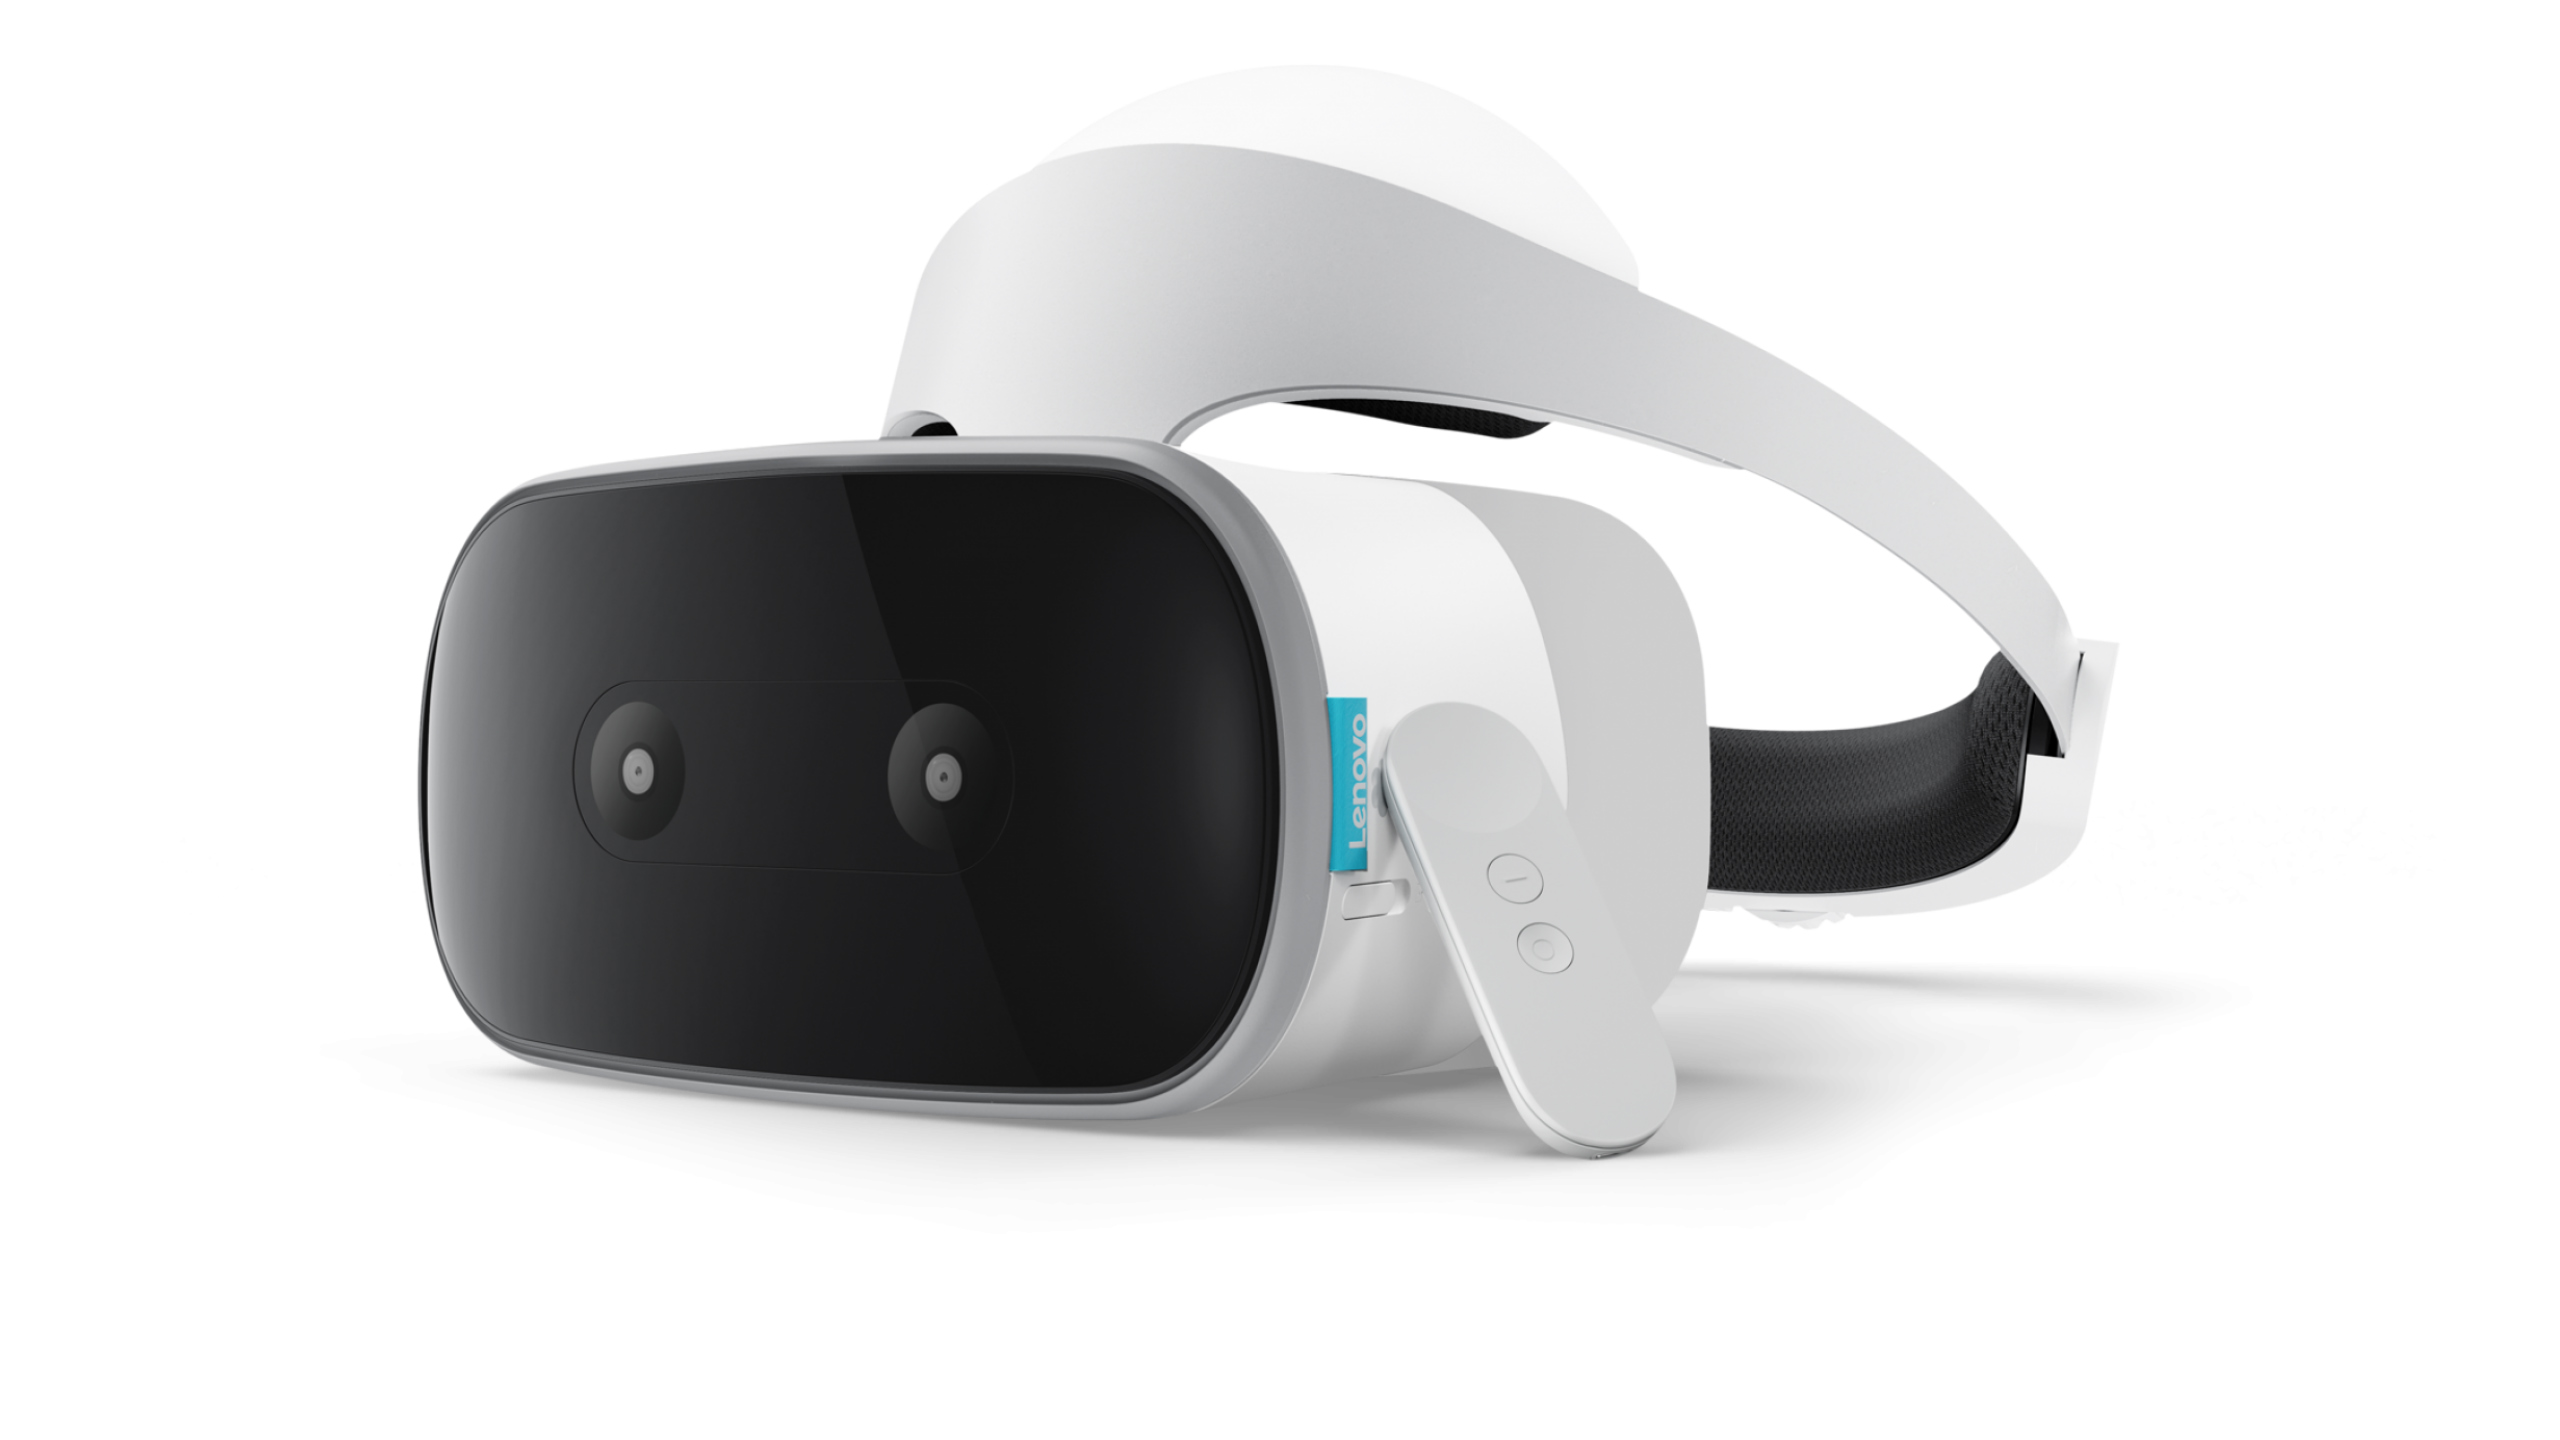 Smartly Designed Mobile Headset Ultra-Crisp QHD Display Standalone VR Headset with Worldsense Body Tracking Lenovo Mirage Solo with Daydream 